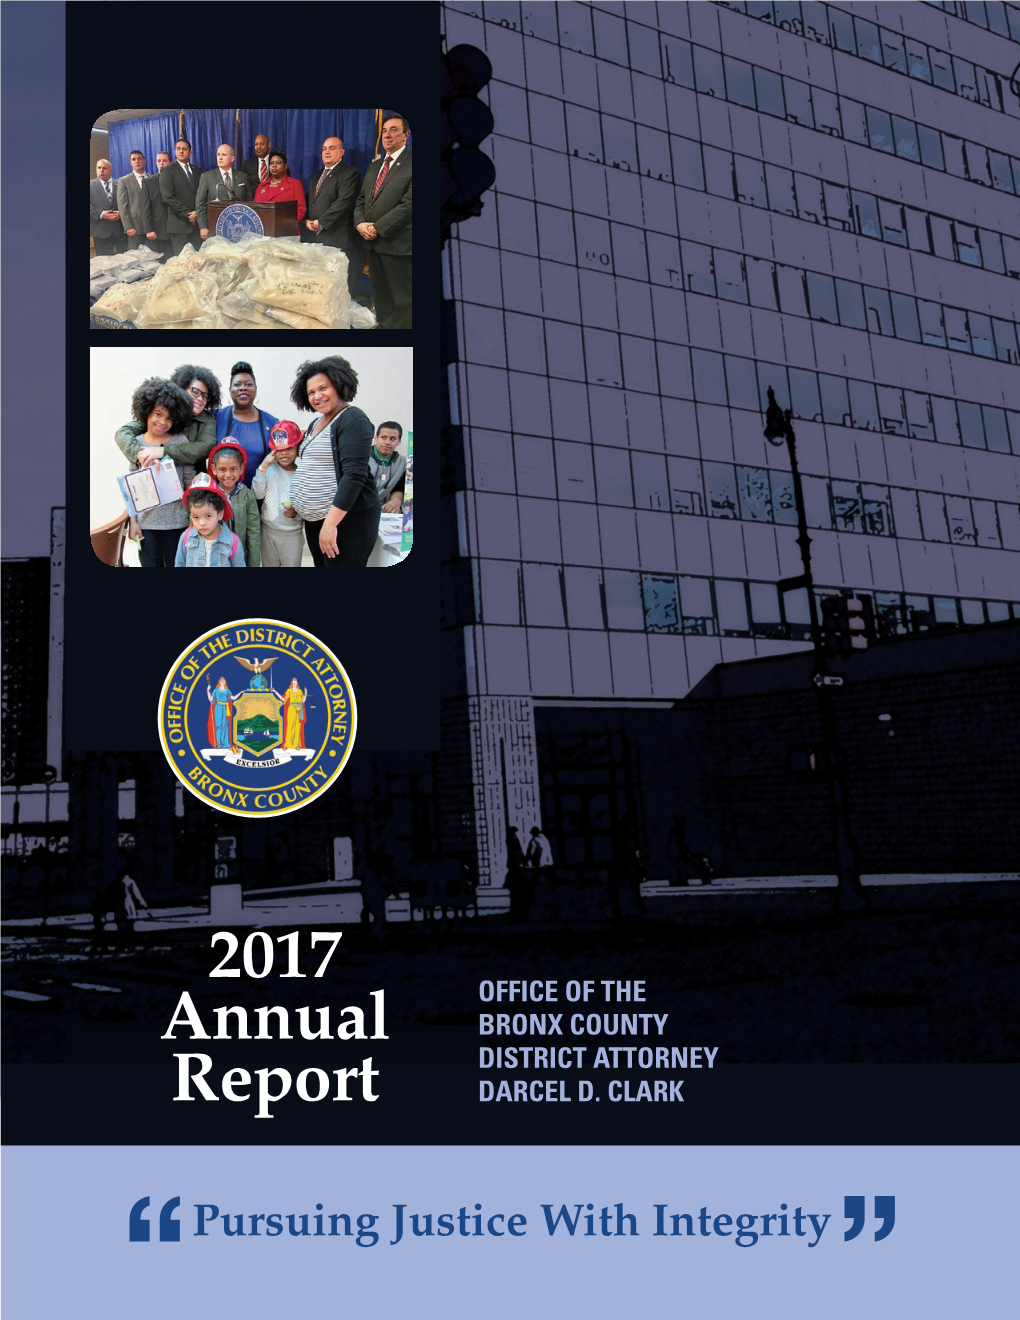 2017 Annual Report ” I Aerial View of the Bronx, New York City